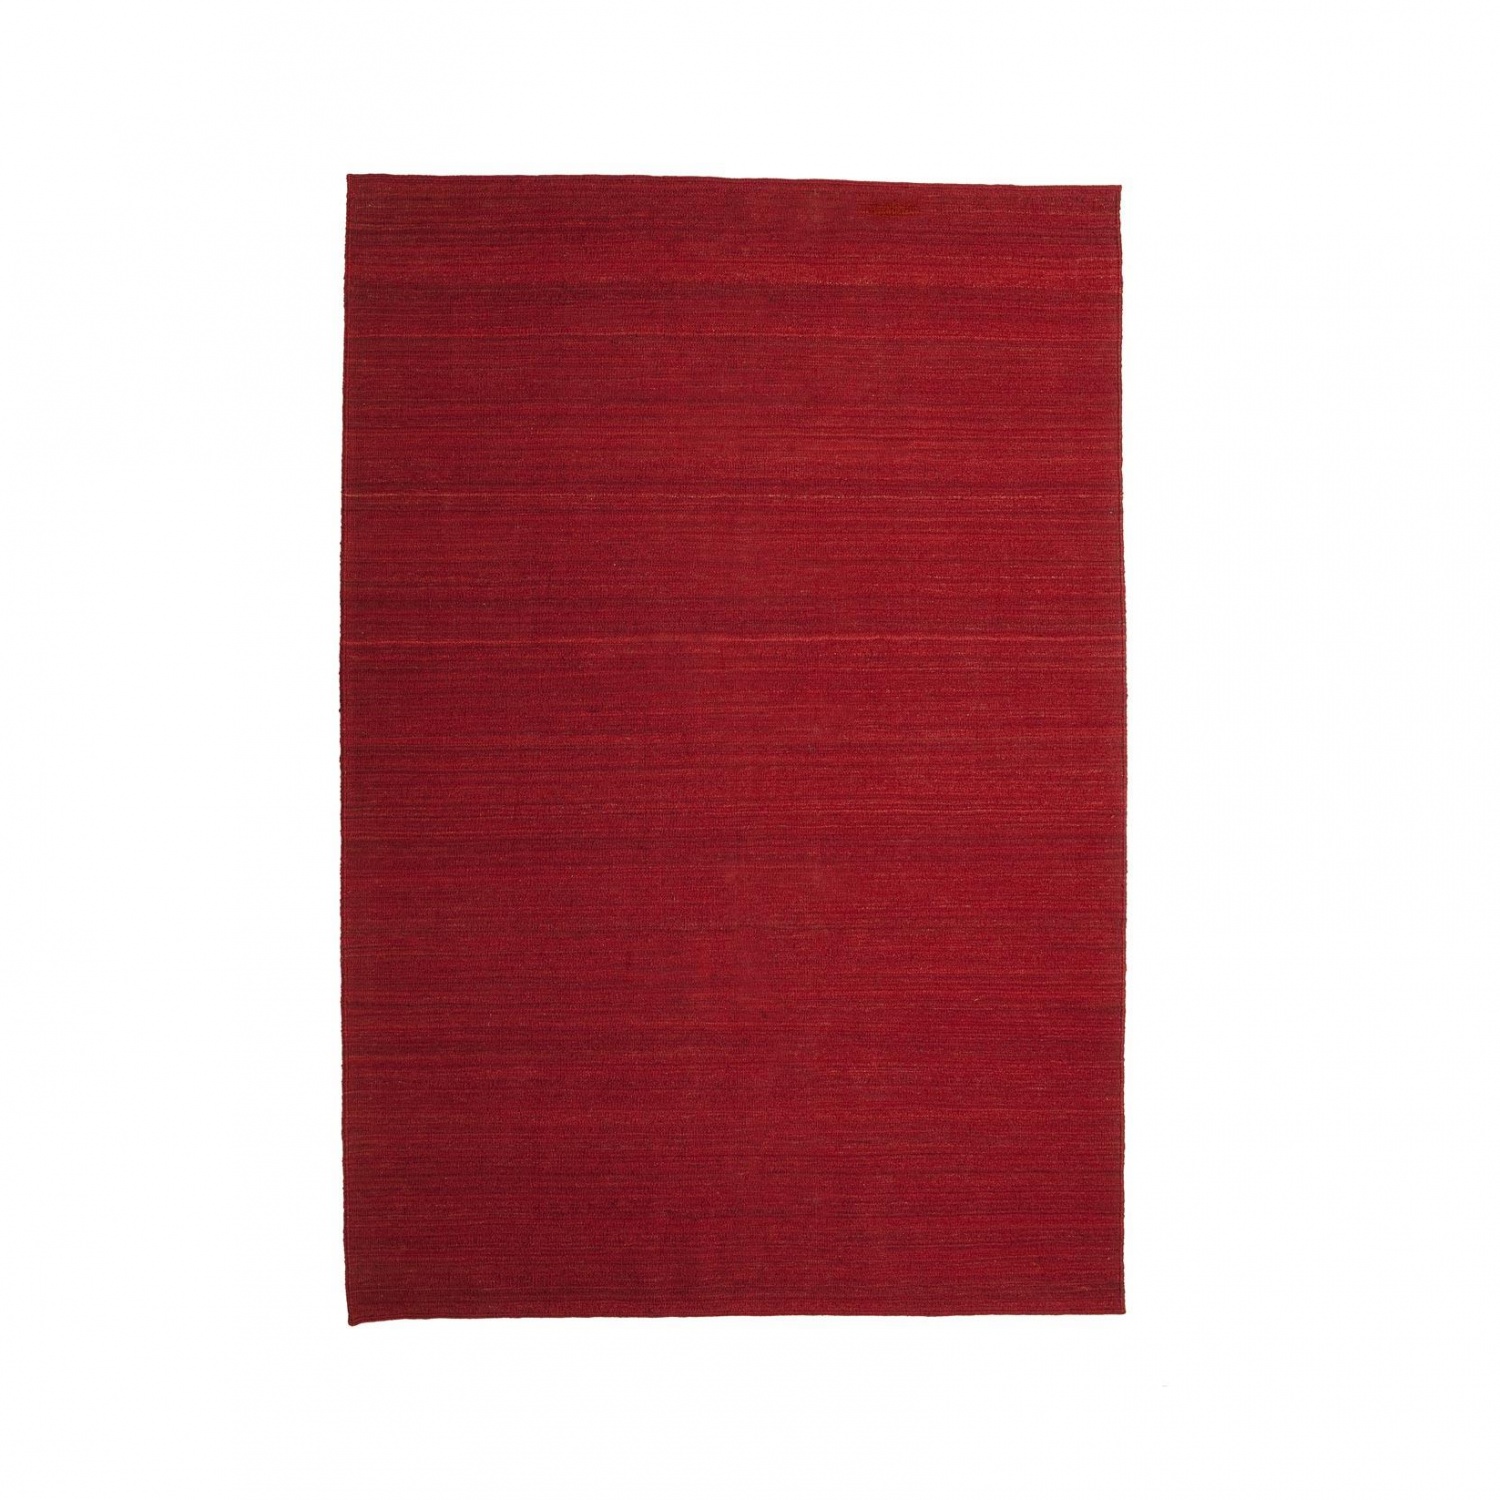 Nanimarquina - Nomad Teppich - tiefes rot/afghanische Wolle/170x240cm von Nanimarquina